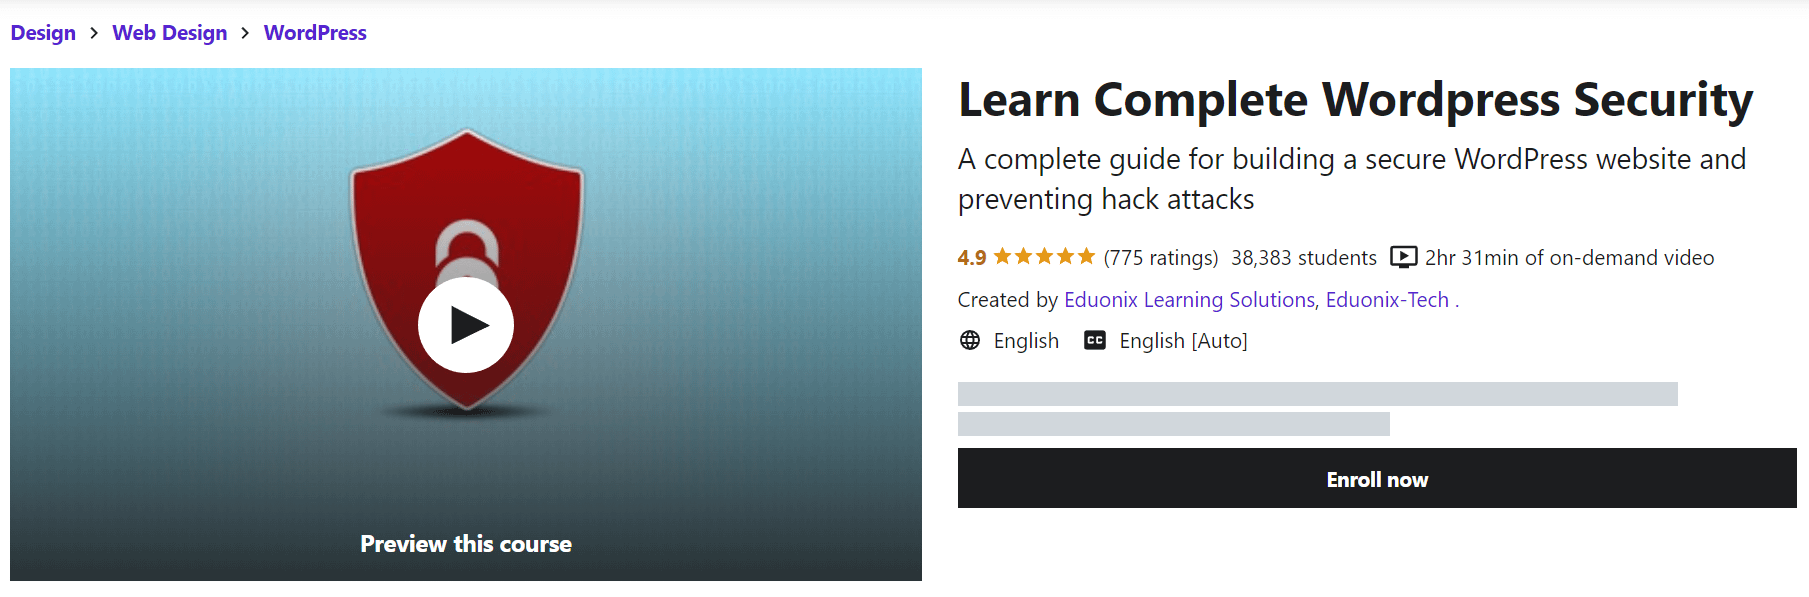 Learn Complete WordPress Security is one of the best free WordPress courses for security. 